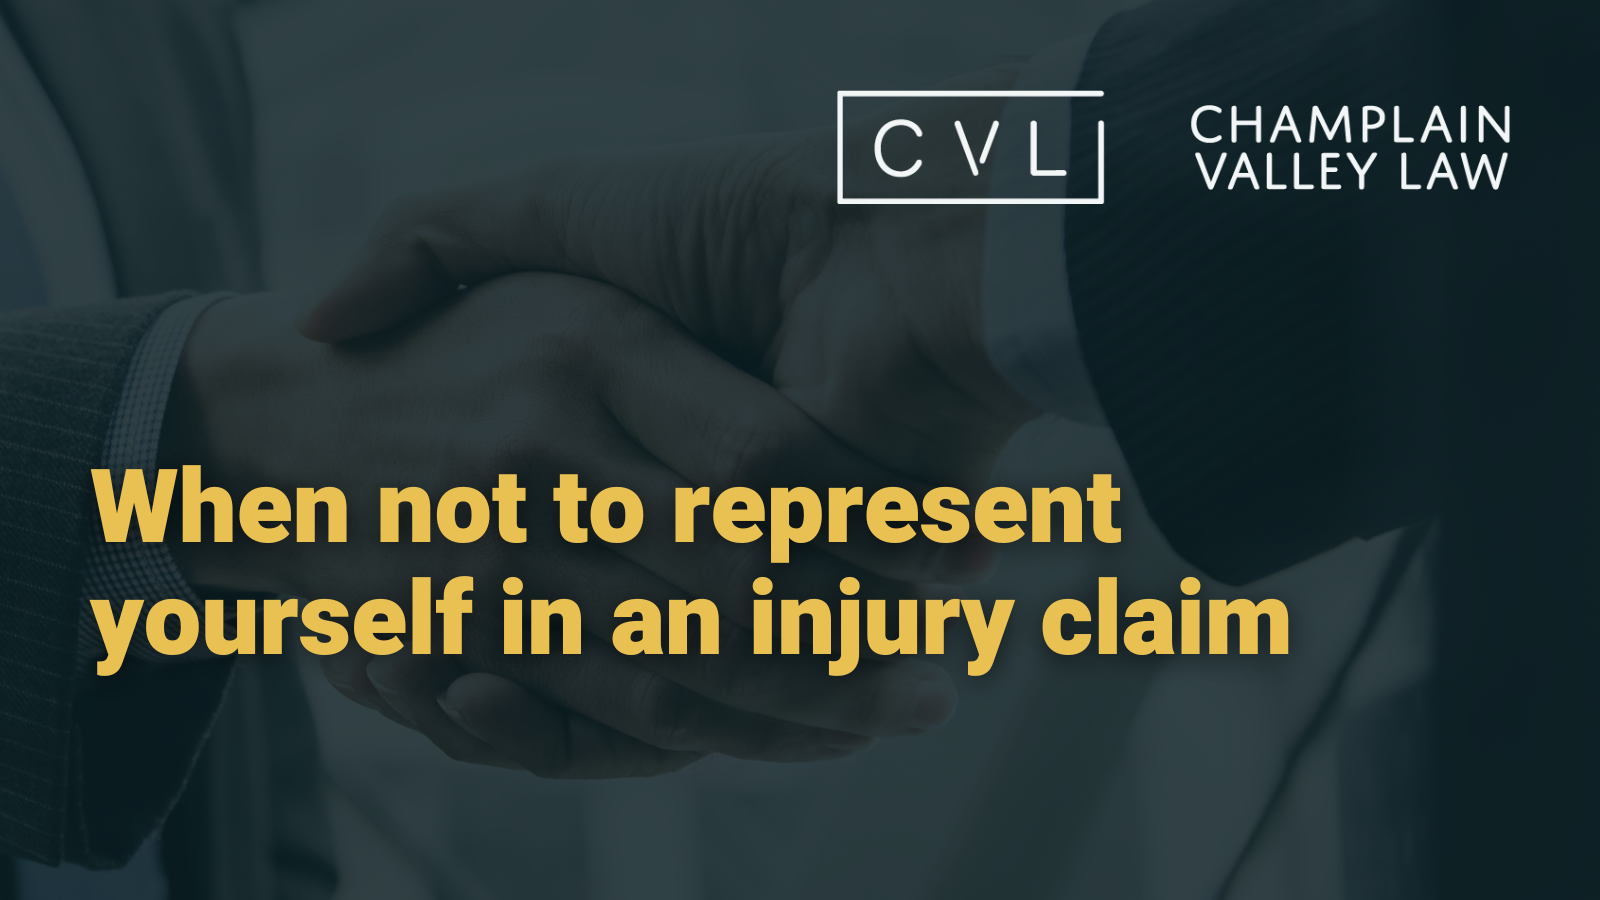 When not to represent yourself in a personal injury claims